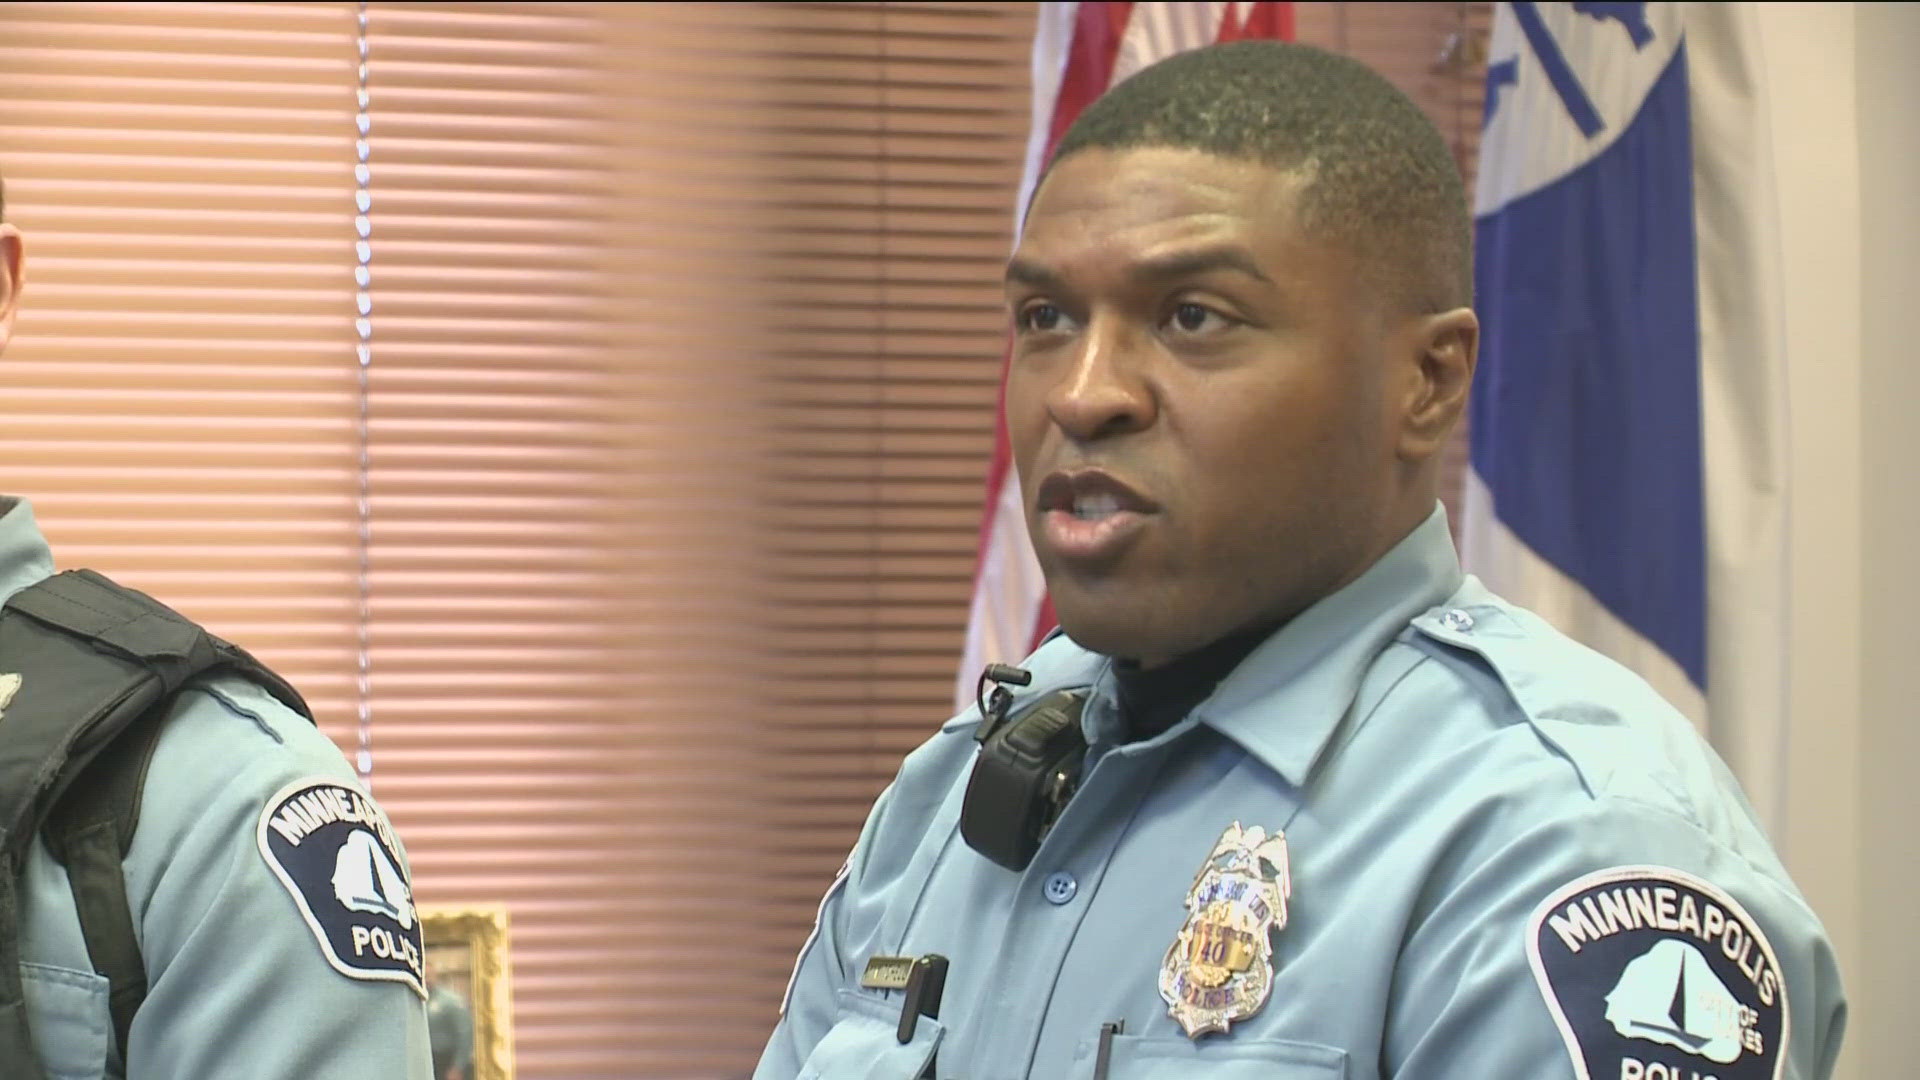 Officer Jamal Mitchell died Thursday after being shot while attempting to render aid.